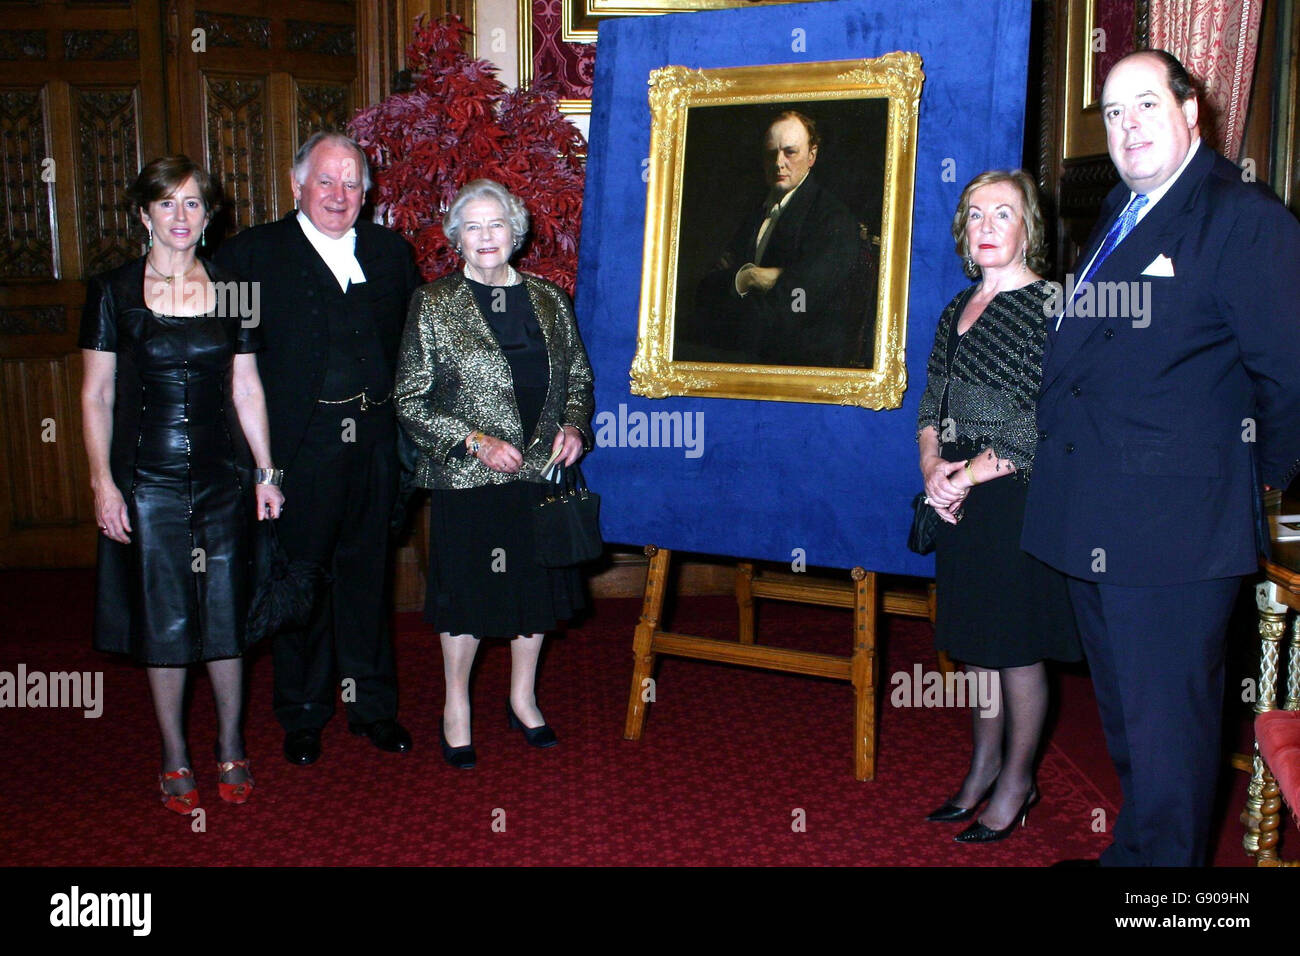 Sir Winston Churchill's family is joined by key figures from Dublin City Gallery the Hugh Lane, in London, Thursday November 3, 2005, as the gallery granted the temporary loan of one of its most famous works to the Speaker of the House of Commons. Watch for PA story IRISH Painting. PRESS ASSOCIATION photo. Photo credit should read: Grayling/PA Stock Photo